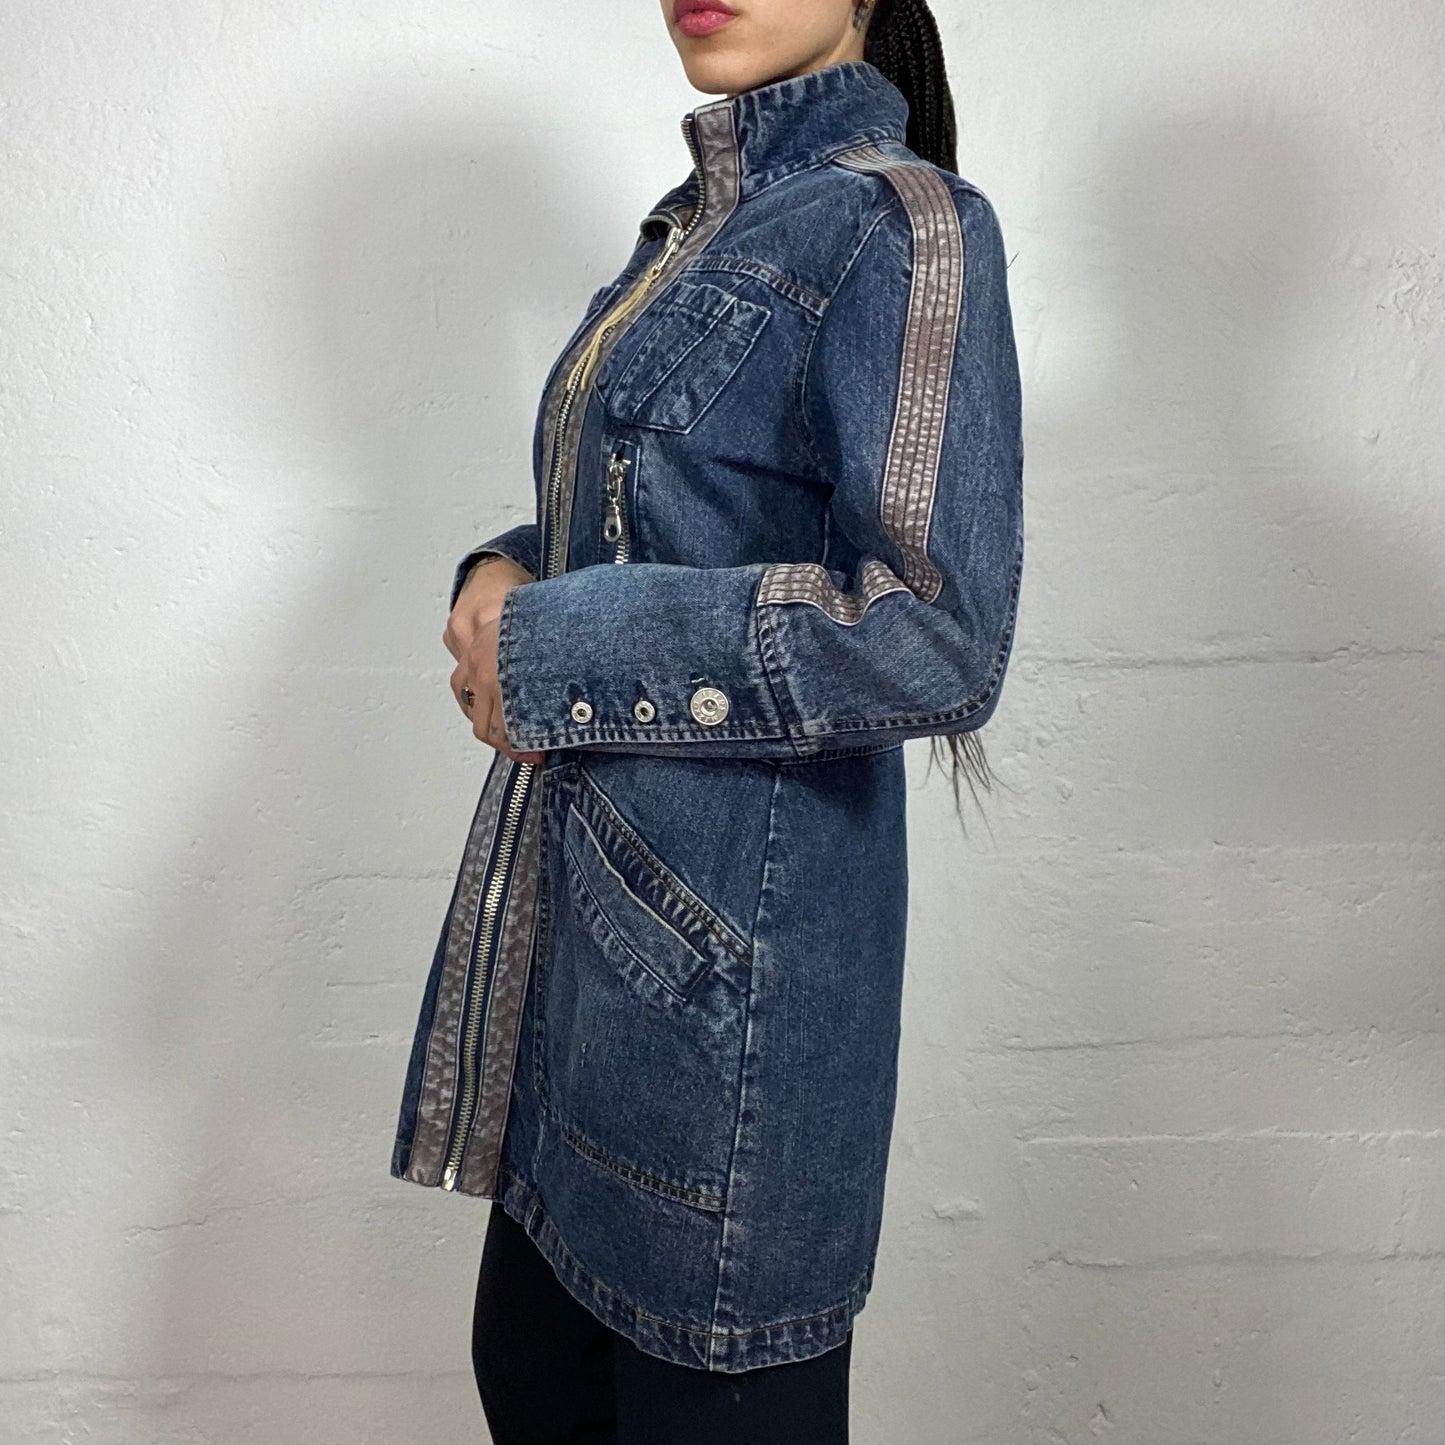 Vintage 2000's Archive Blue Denim High Neck Zip Up Coat with Multiple Pockets and Zippers (M)